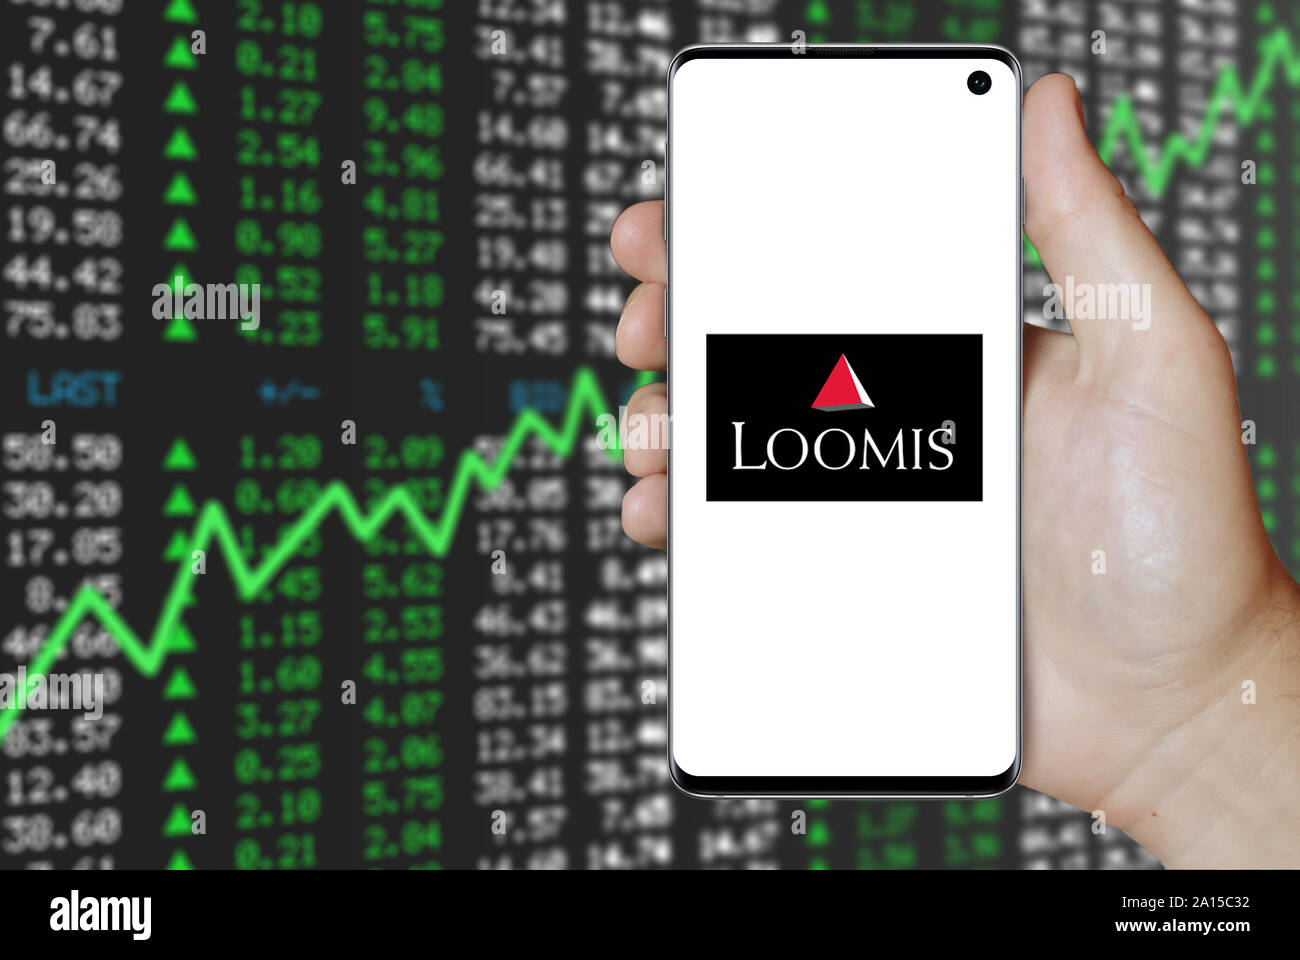 A man holds a smartphone displaying the logo of company Loomis